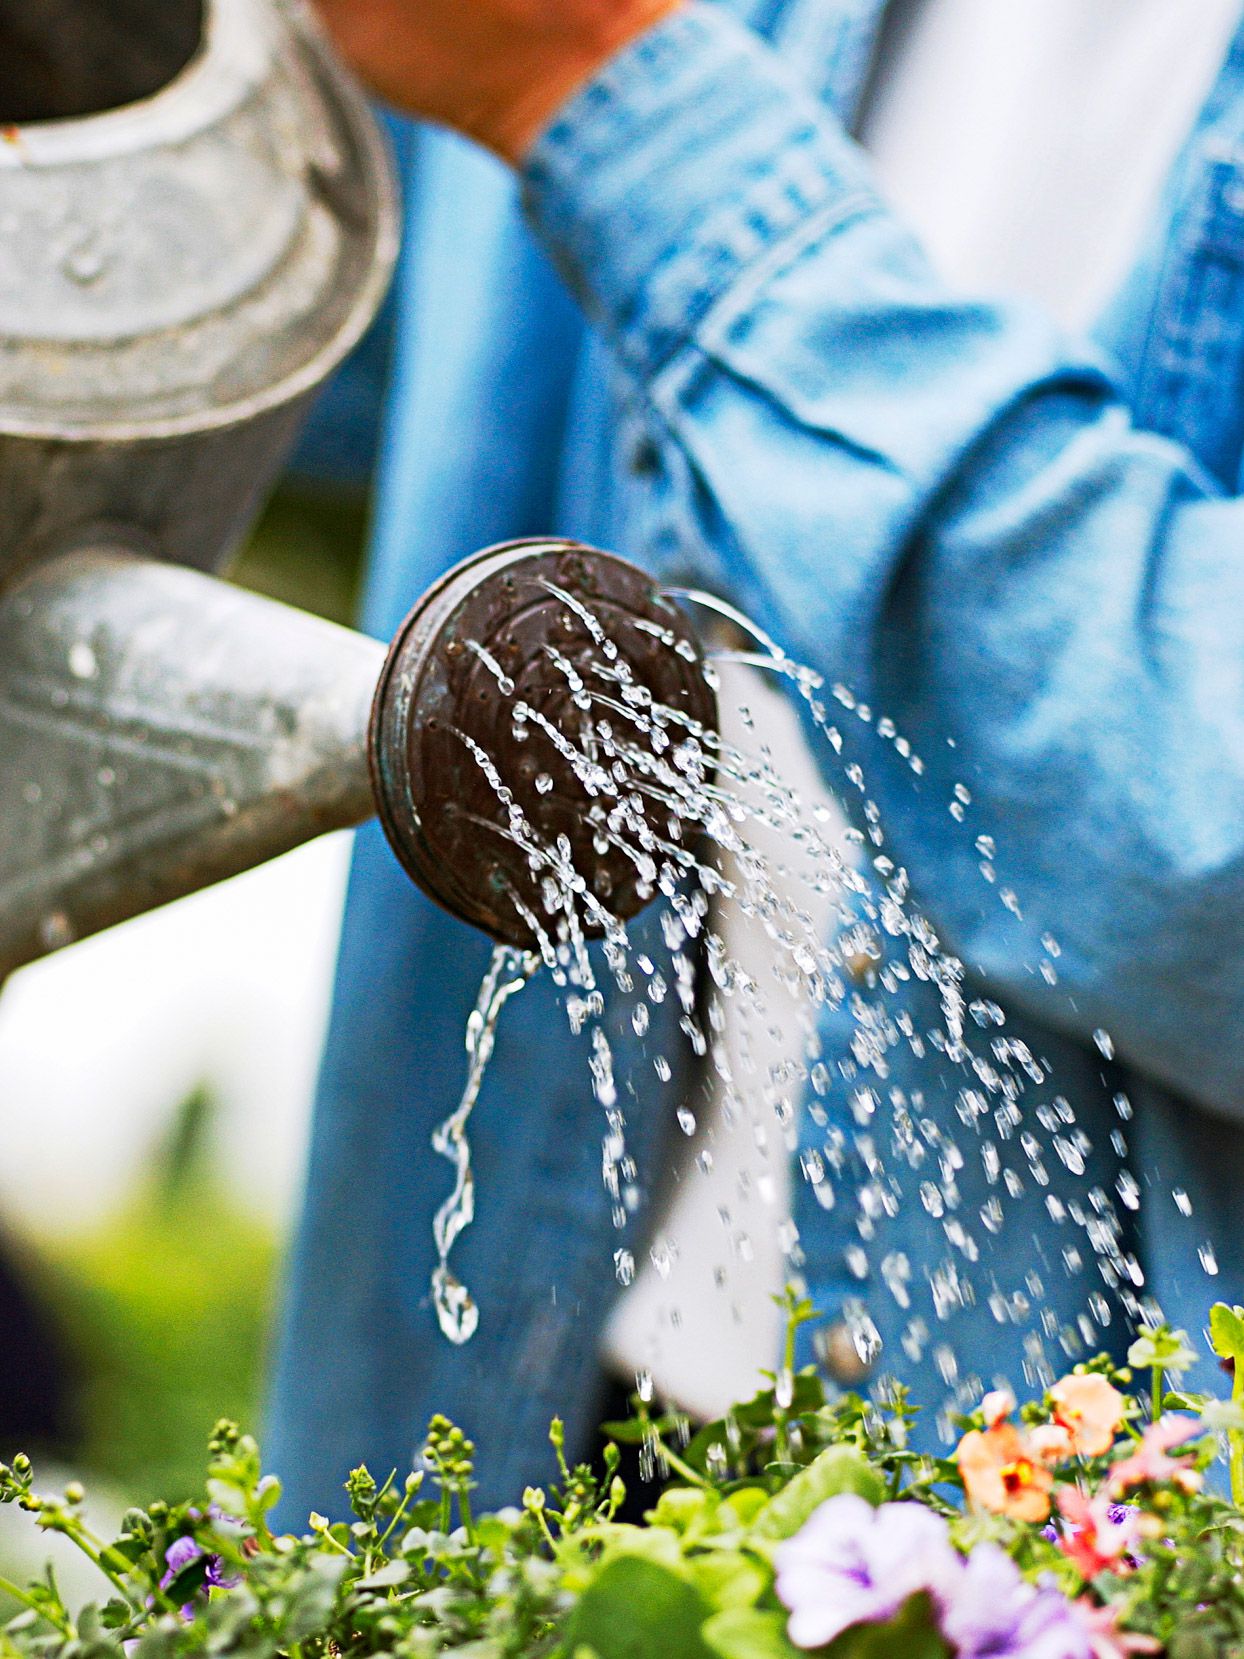 The Essential Guide to Properly Watering Your Flower Garden for Optimal Growth and Blooms